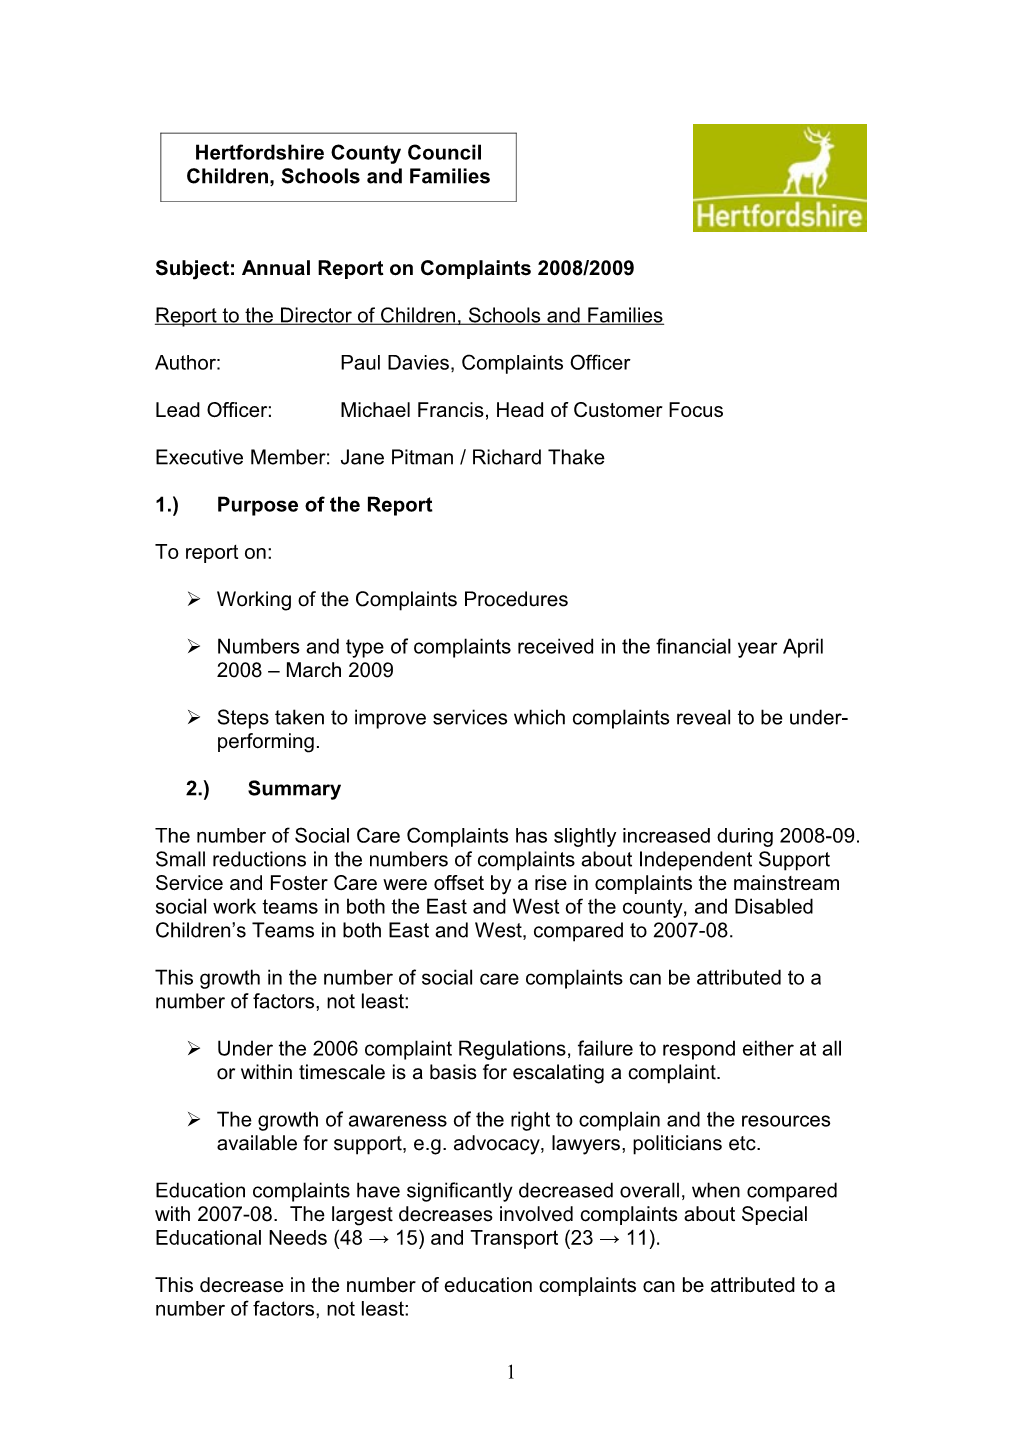 Subject: Annual Report on Complaints 2008/2009